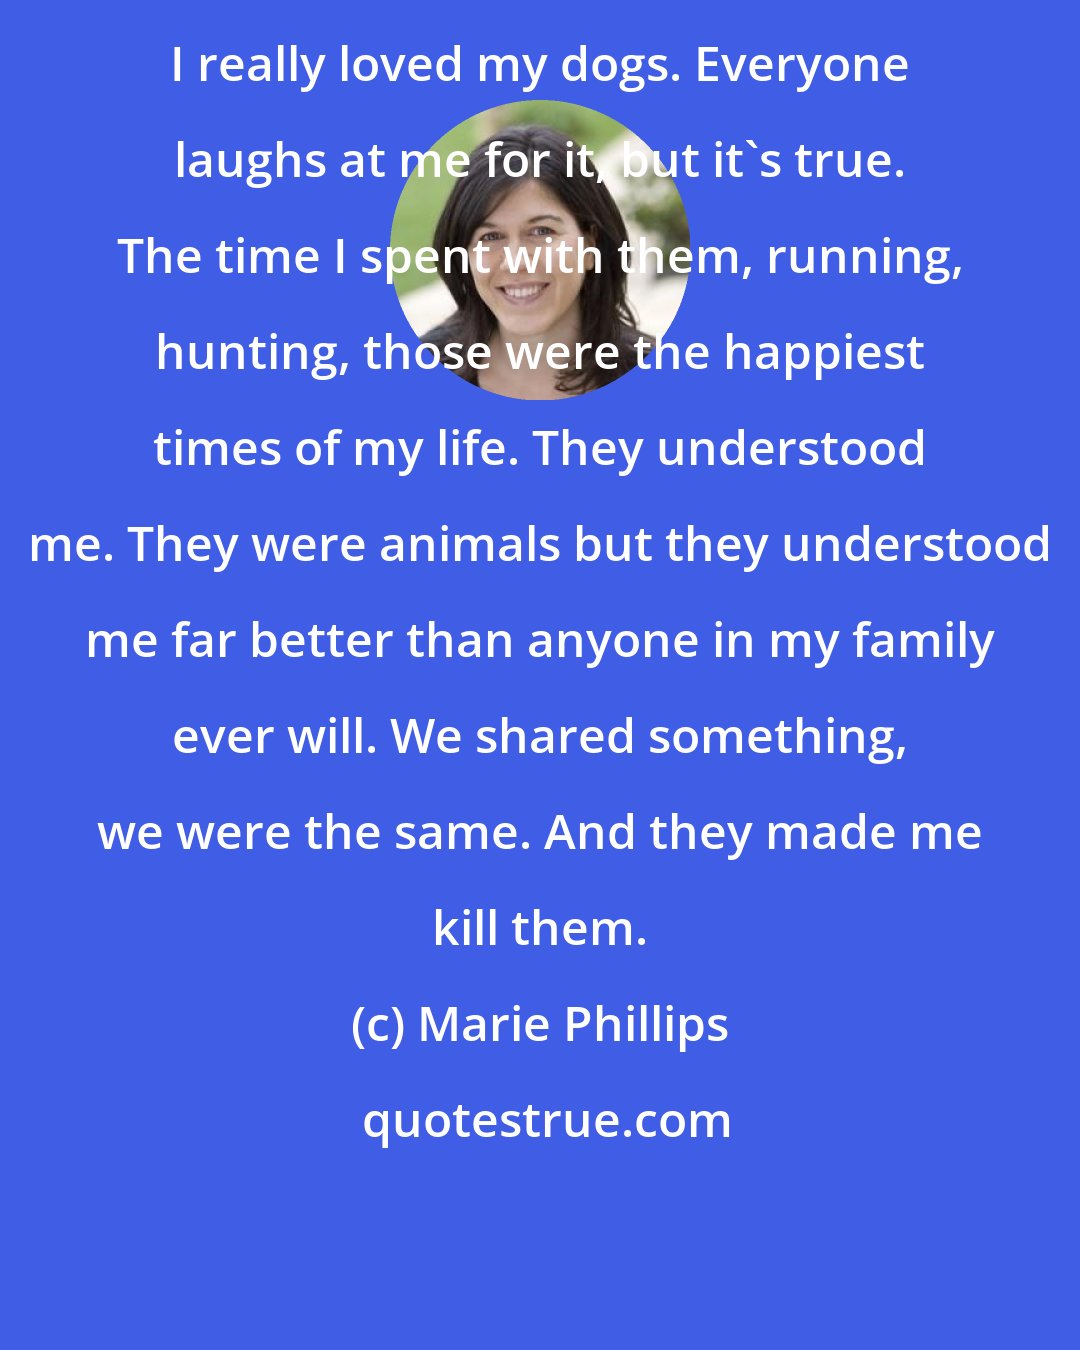 Marie Phillips: I really loved my dogs. Everyone laughs at me for it, but it's true. The time I spent with them, running, hunting, those were the happiest times of my life. They understood me. They were animals but they understood me far better than anyone in my family ever will. We shared something, we were the same. And they made me kill them.